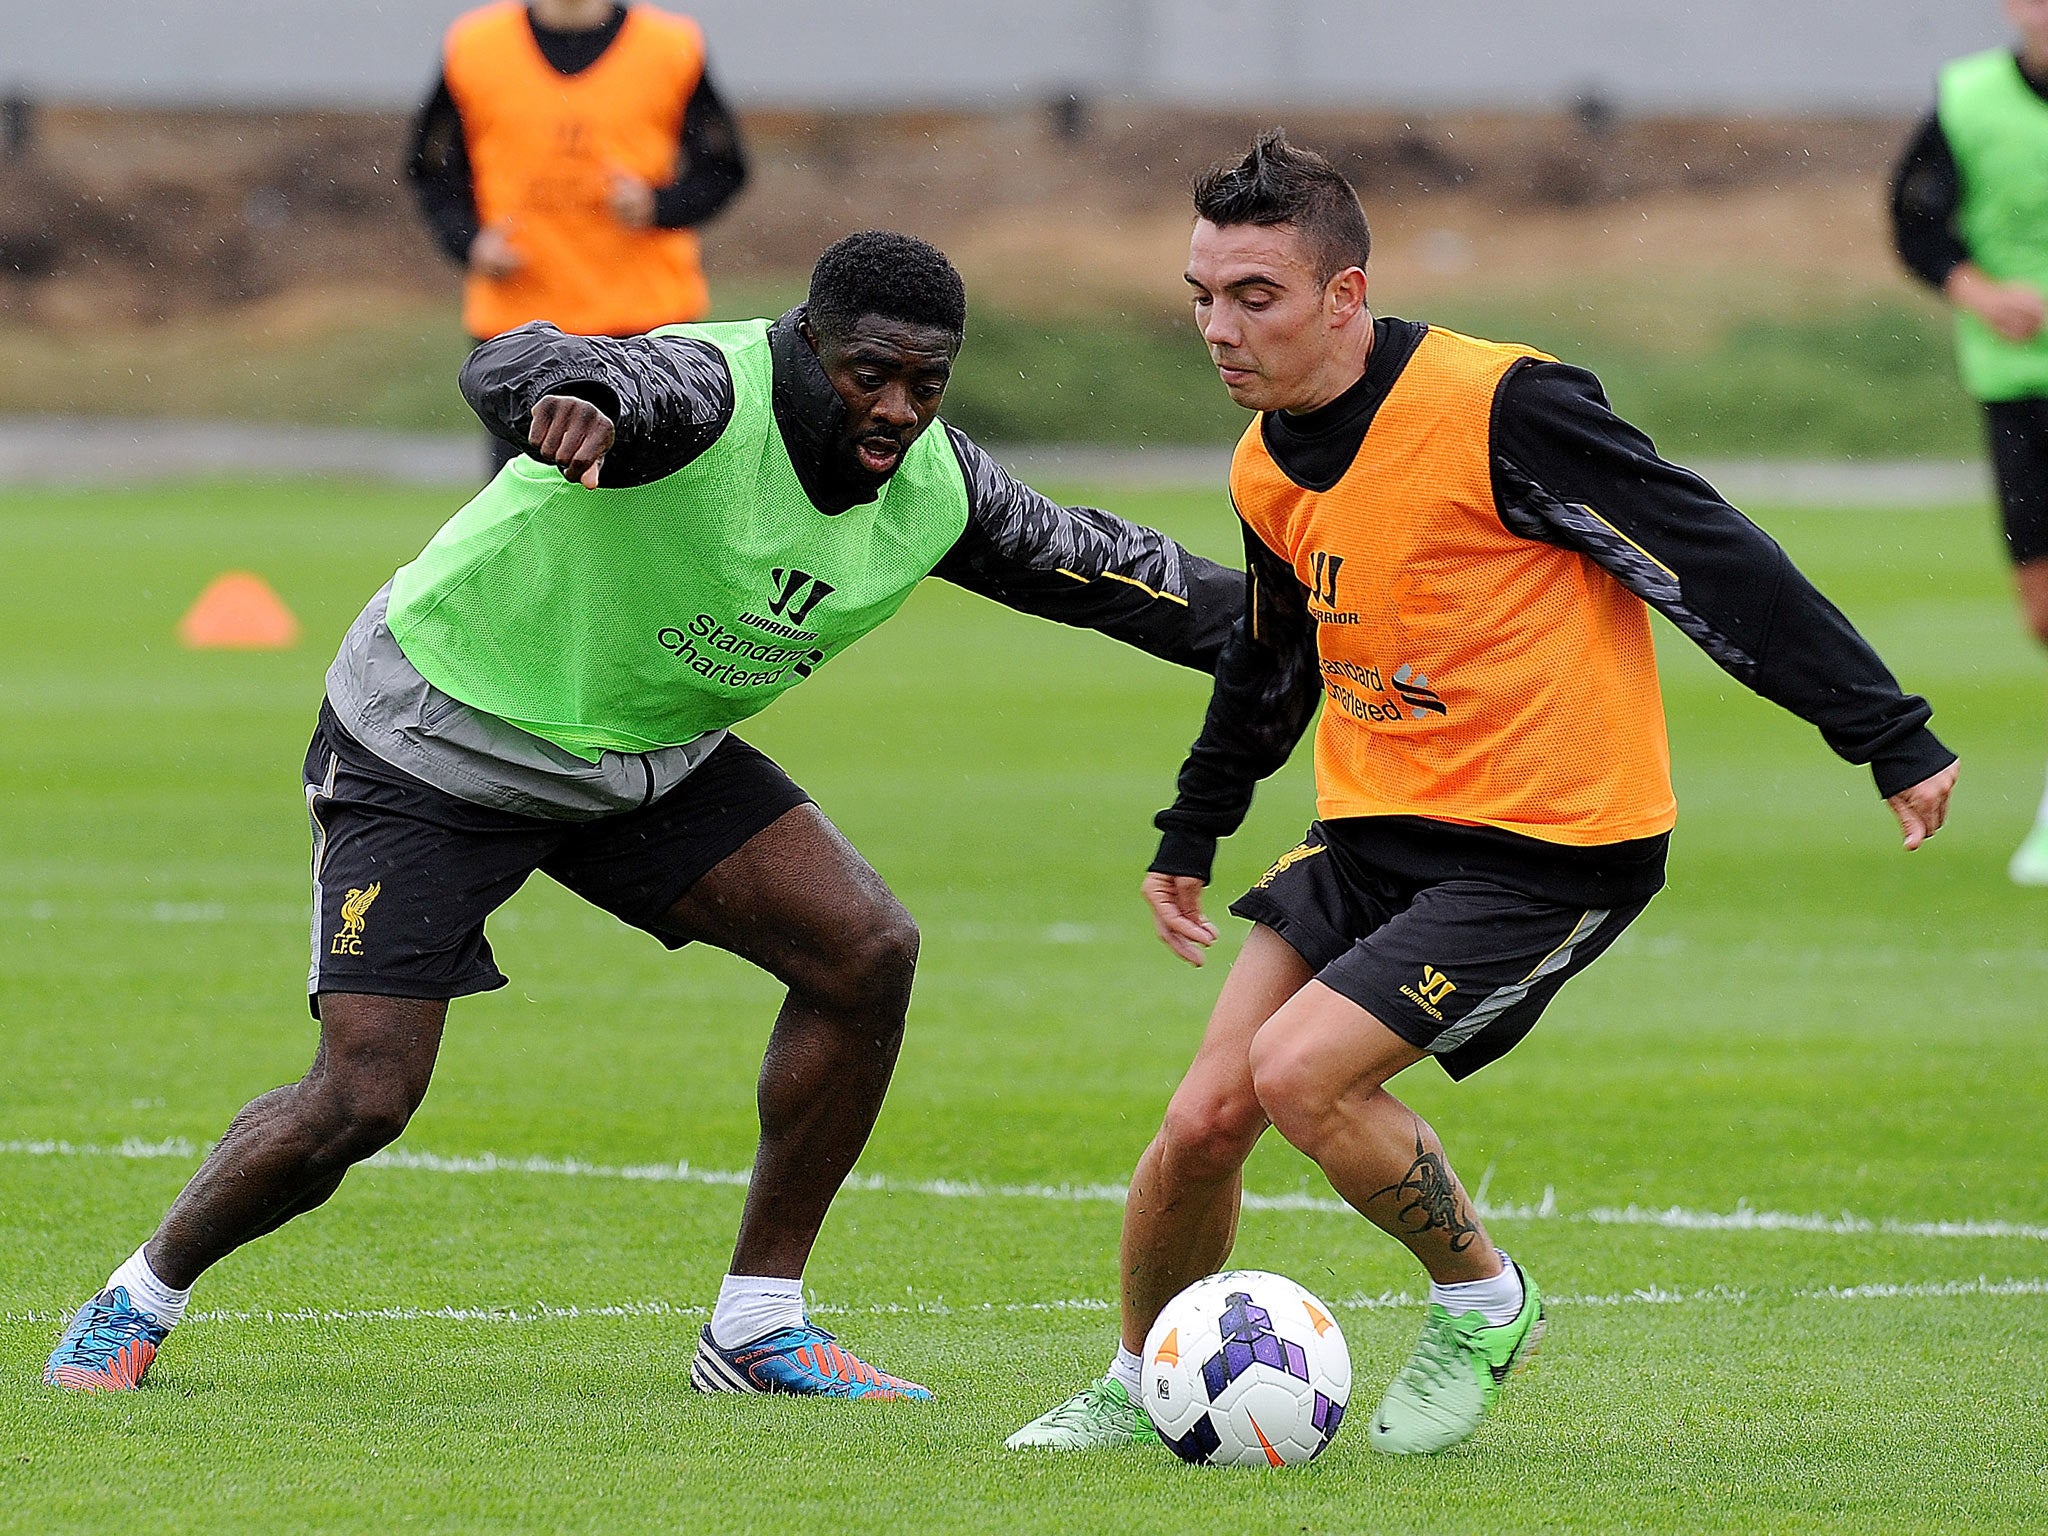 Kolo Toure and Iago Aspas of Liverpool in action during a training session at Melwood Training Ground